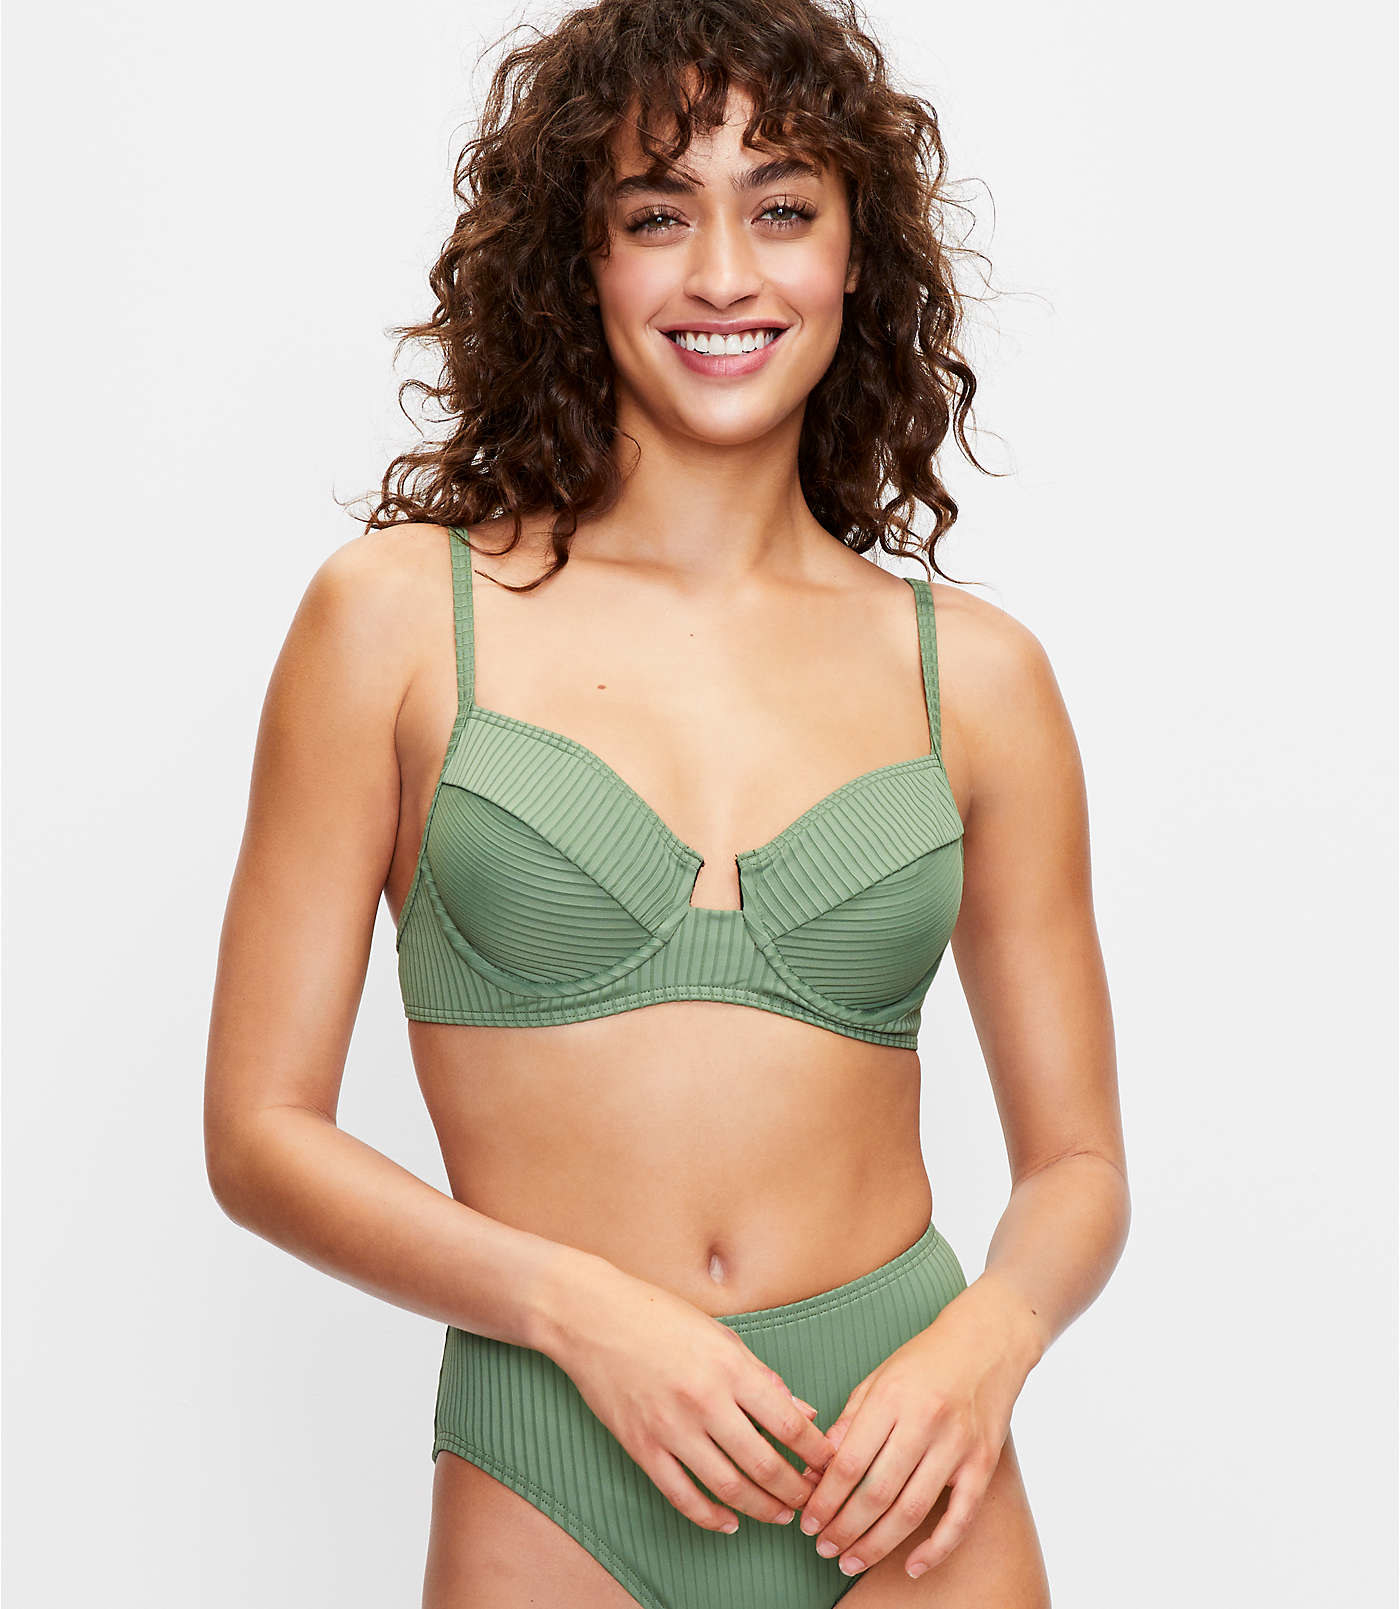  model wearing the high-waisted ribbed bottoms and underwire top in green